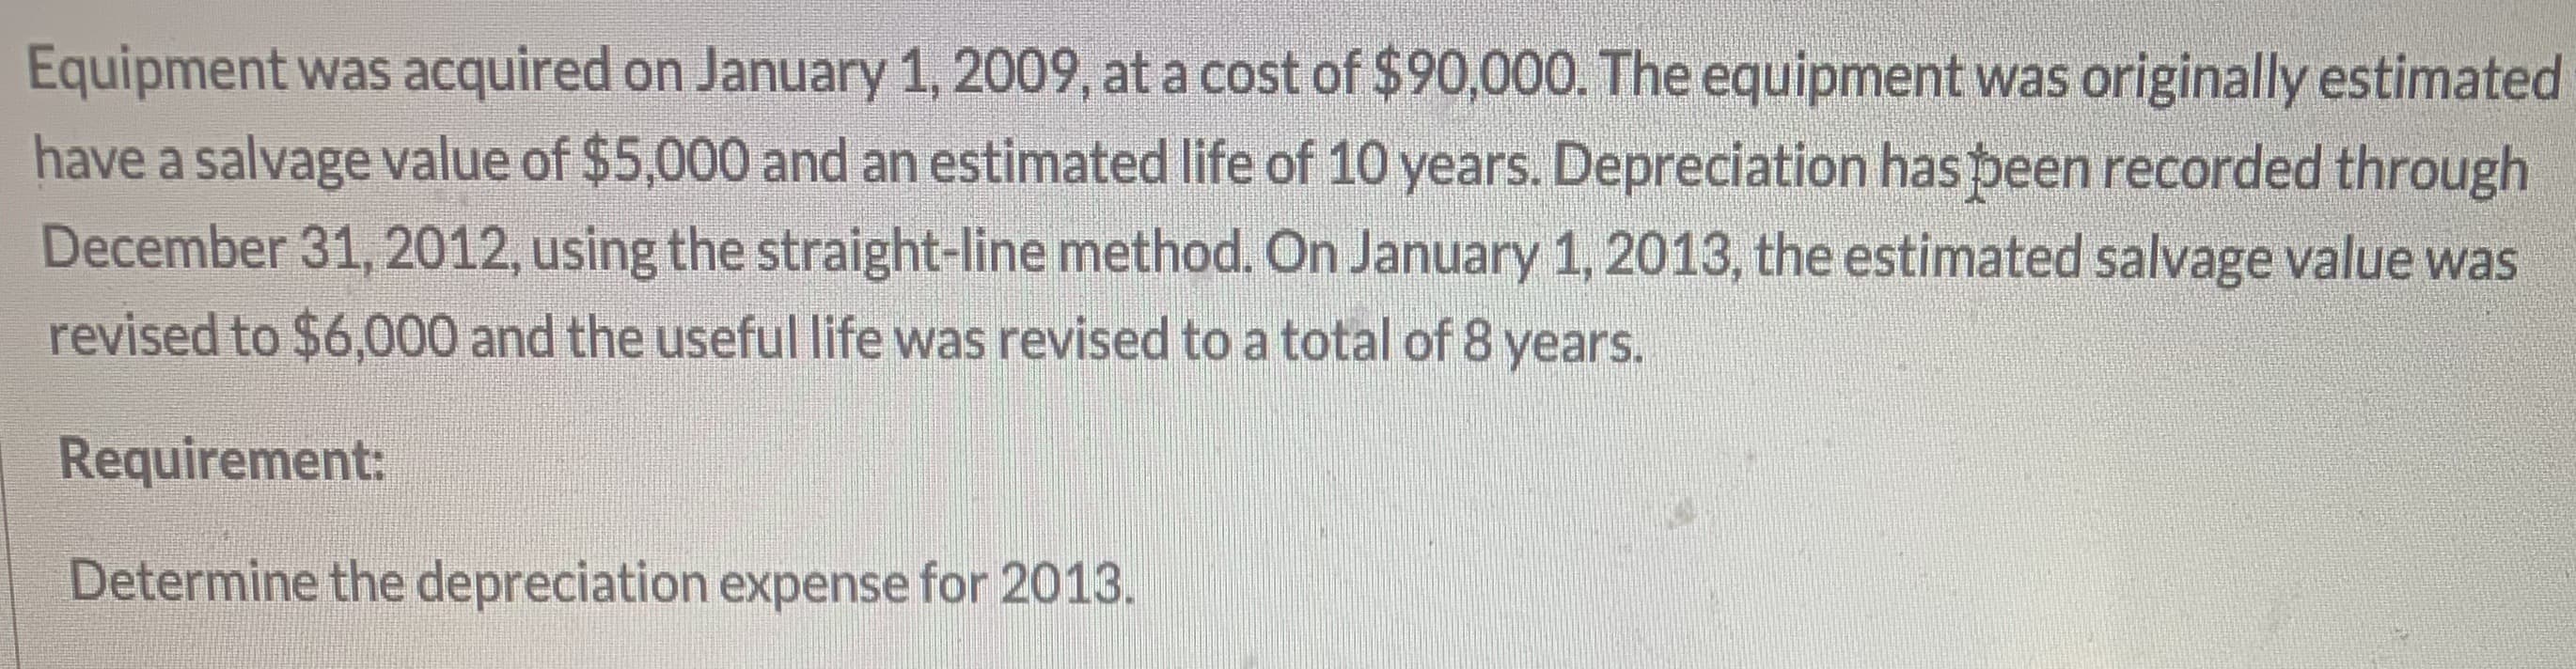 Equipment was acquired on January 1, 2009, at a cost of $90,000. The equipment was originally estimated
have a salvage value of $5,000 and an estimated life of 10 years. Depreciation has peen recorded through
December 31, 2012, using the straight-line method. On January 1, 2013, the estimated salvage value was
revised to $6,000 and the useful life was revised to a total of 8 years.
Requirement:
Determine the depreciation expense for 2013.
